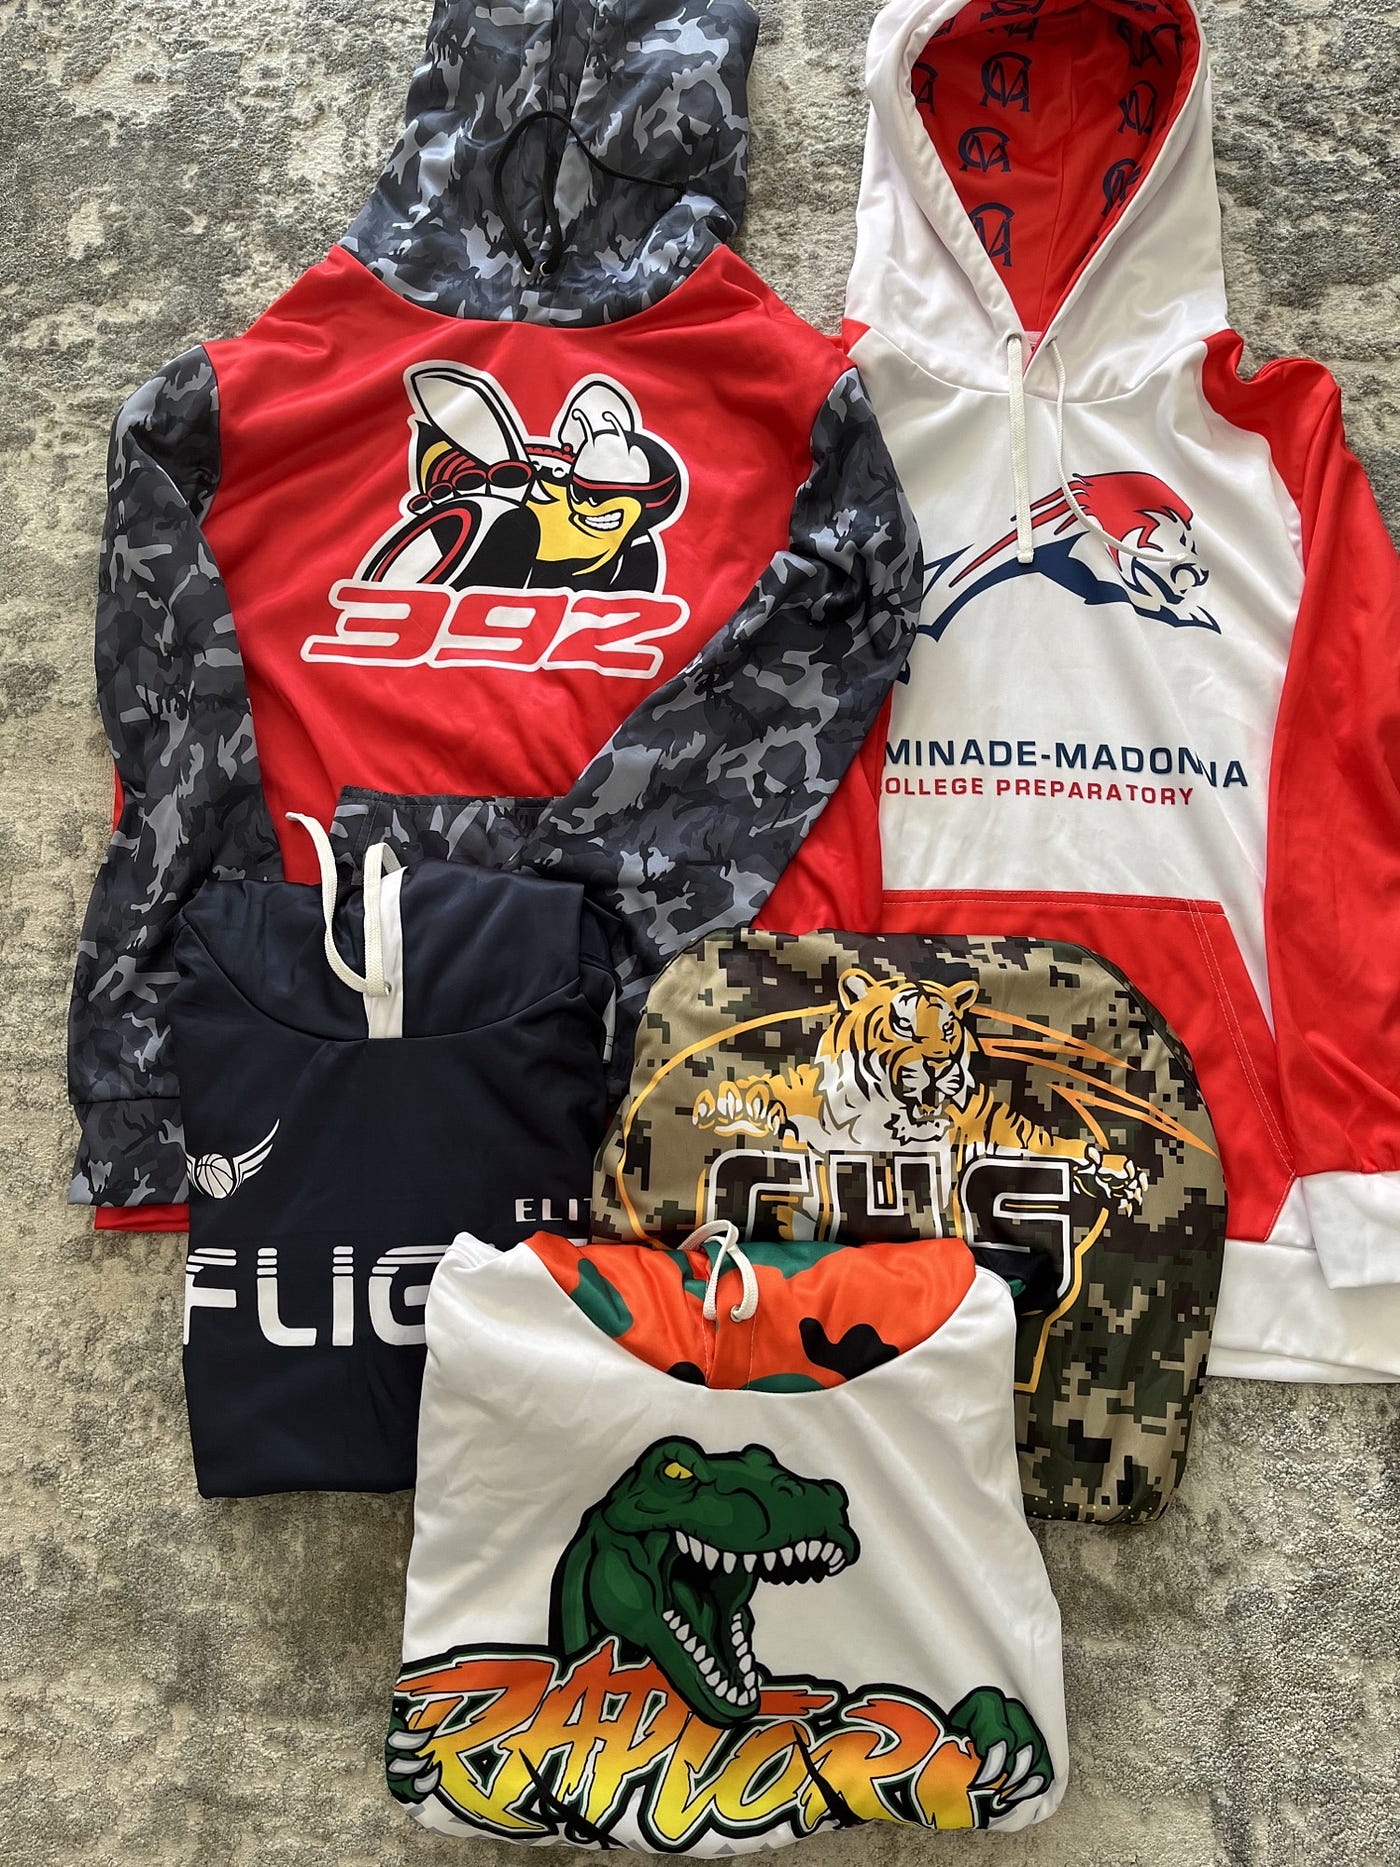 Personalize Your Look with Custom Sublimated Hoodies from Spartan Merch |  by Spartan Apparel and Merch | Apr, 2023 | Medium